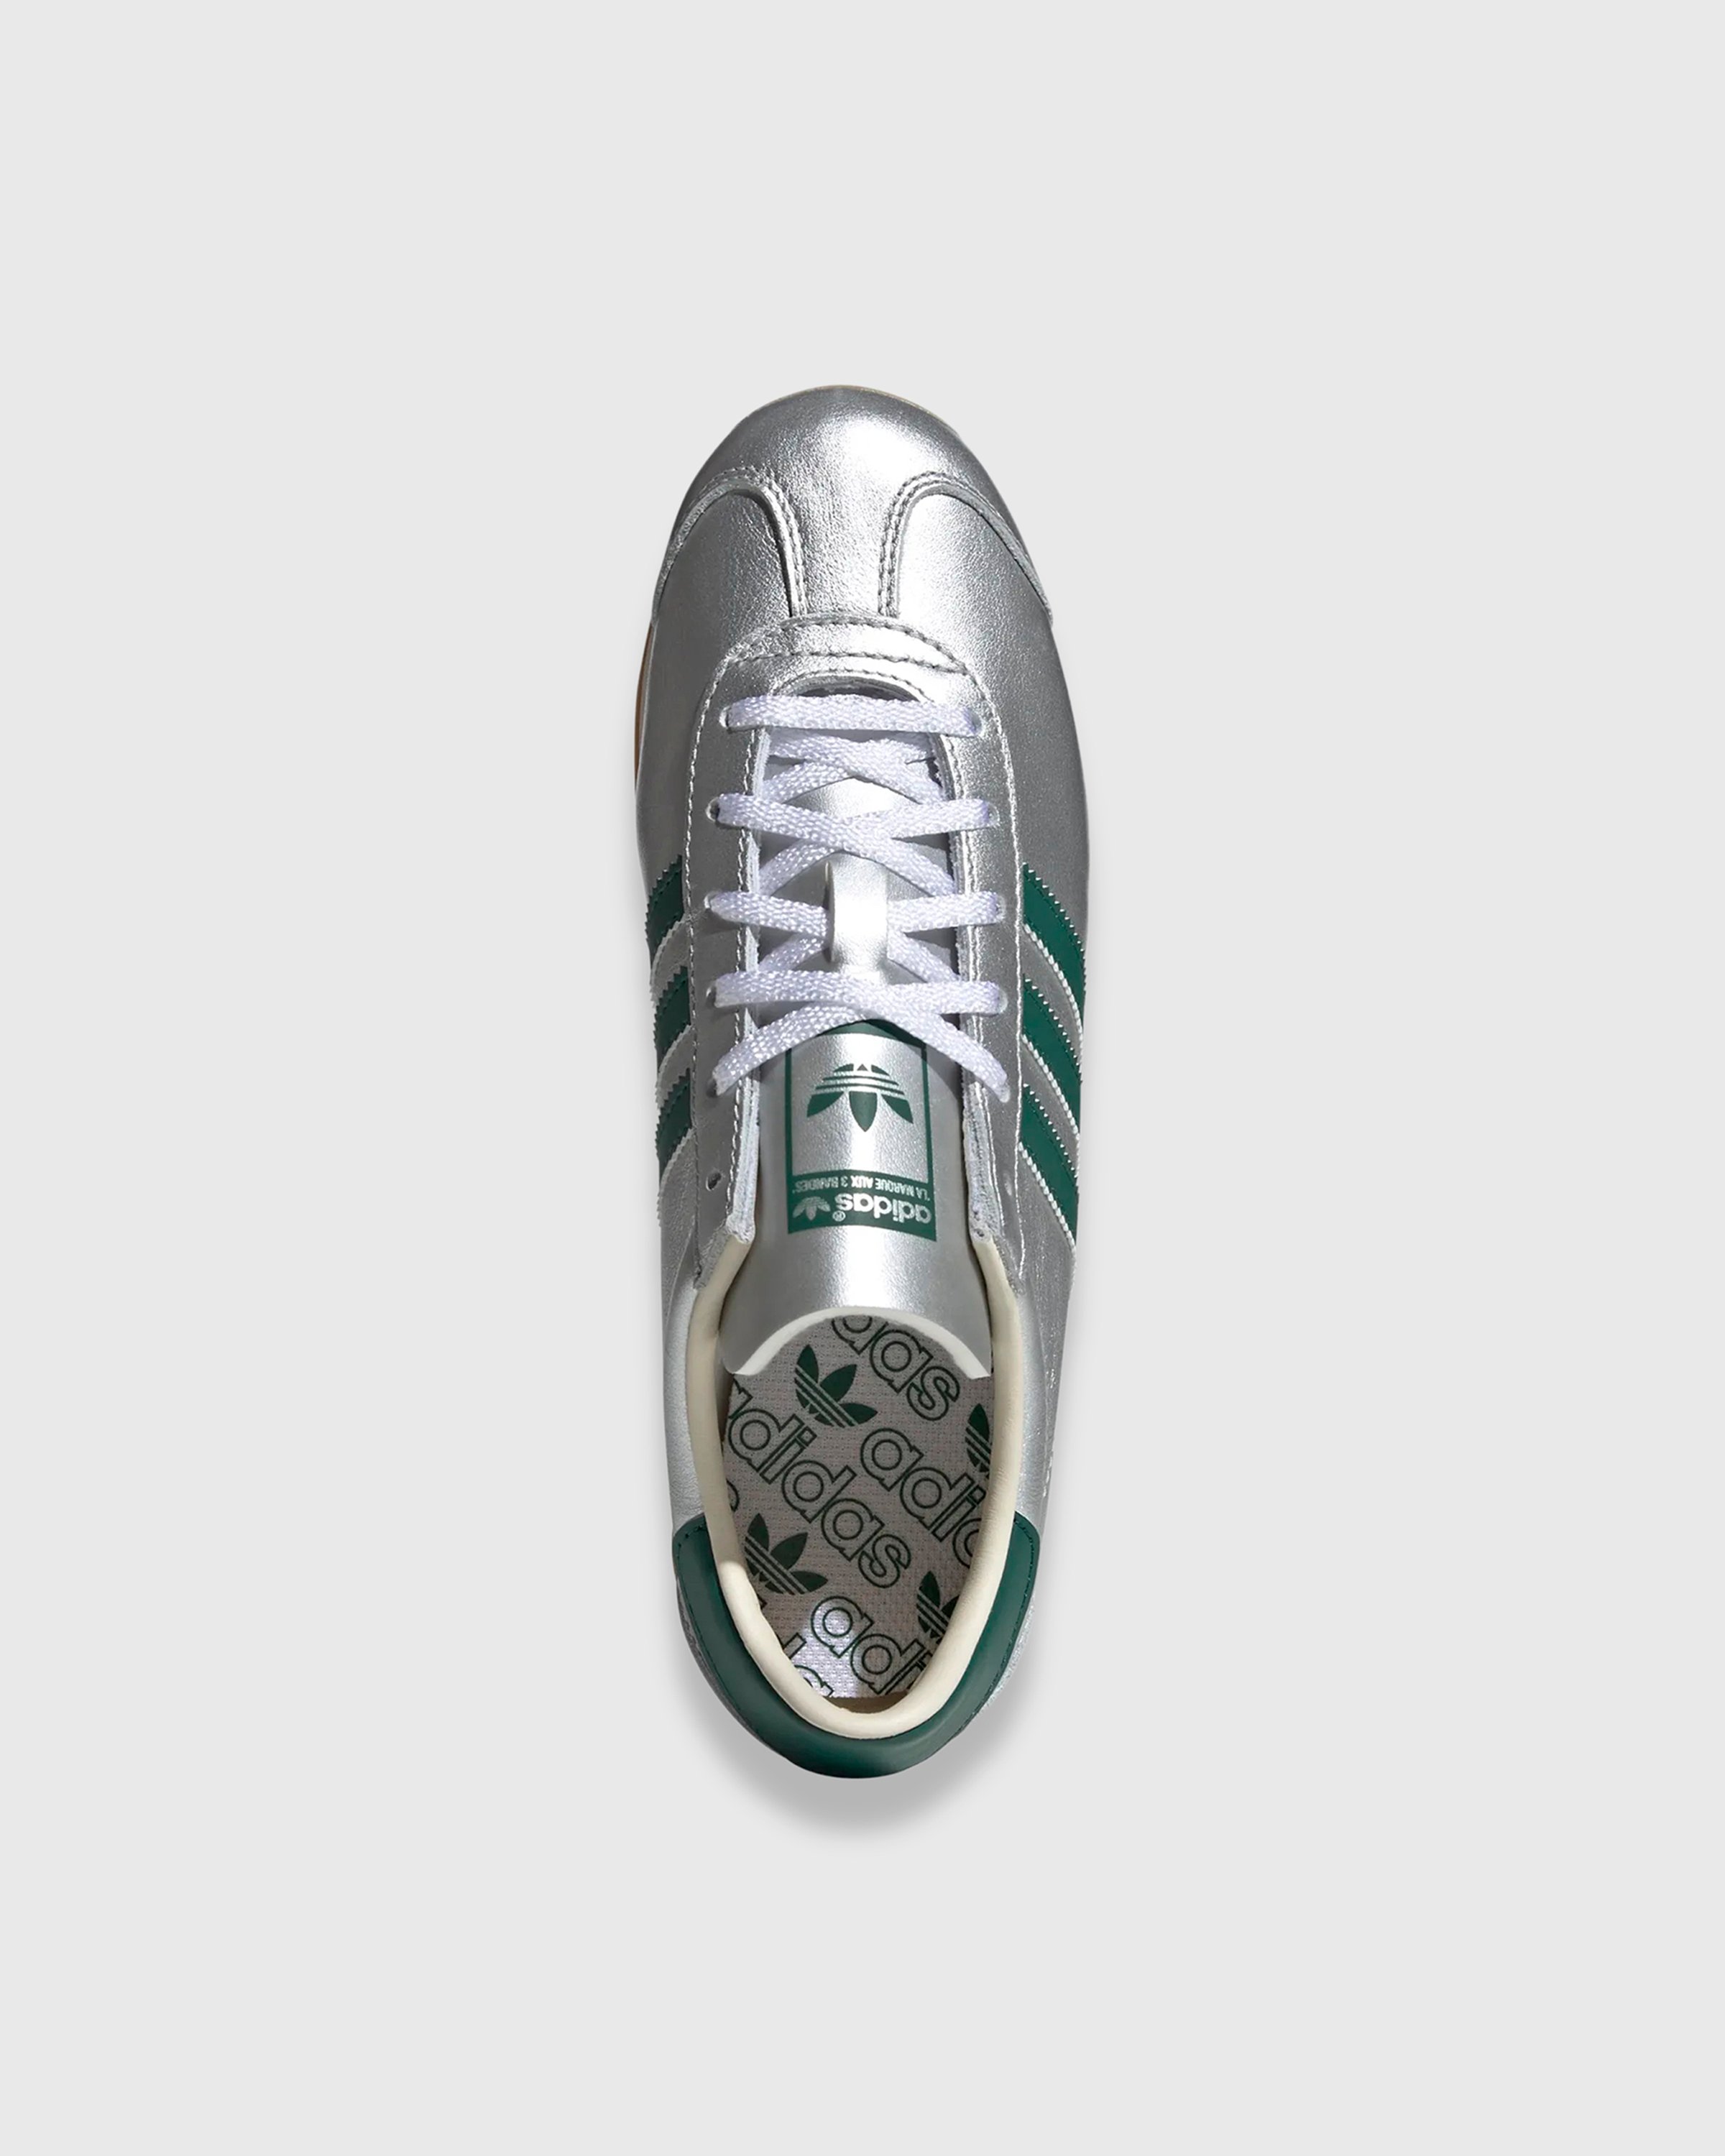 Adidas - COUNTRY OG W        SILVMT/CGREEN/CWHITE - Footwear - Silver - Image 5